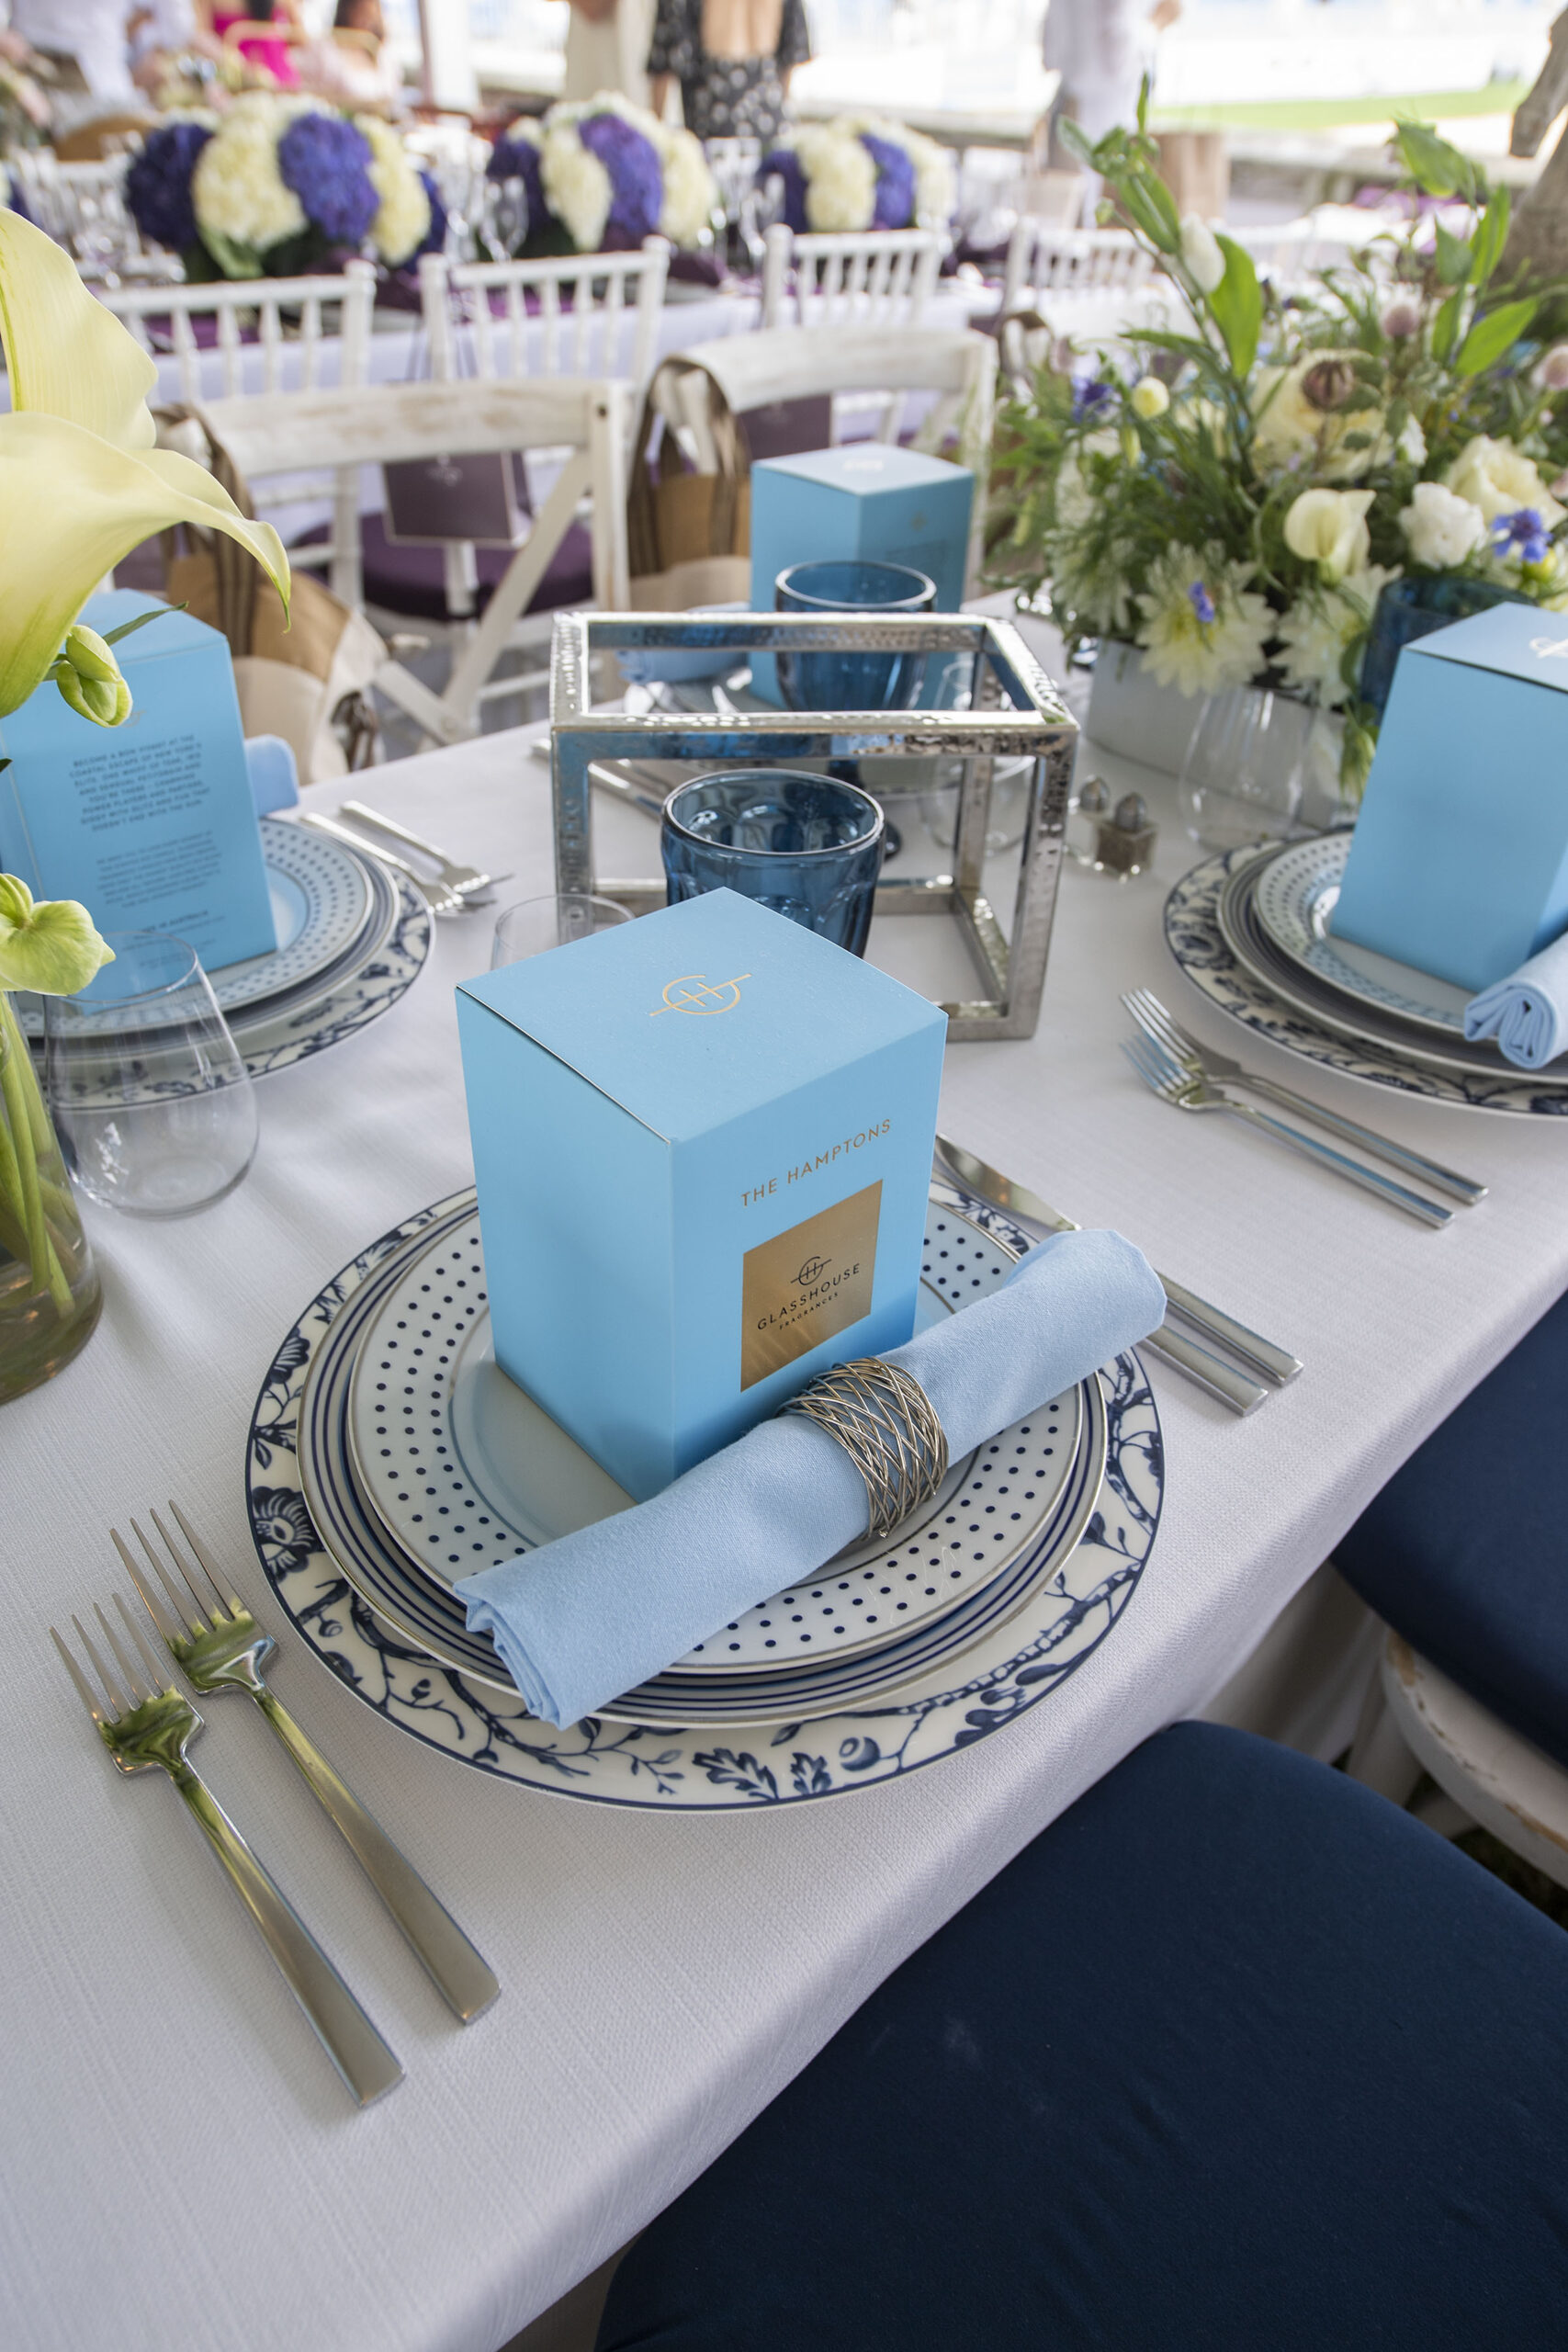 The table setting for Douglas Elliman Real Estate in the VIP tent at the 2021 Hampton Classic on Grand Prix Sunday, September 5th, 2021